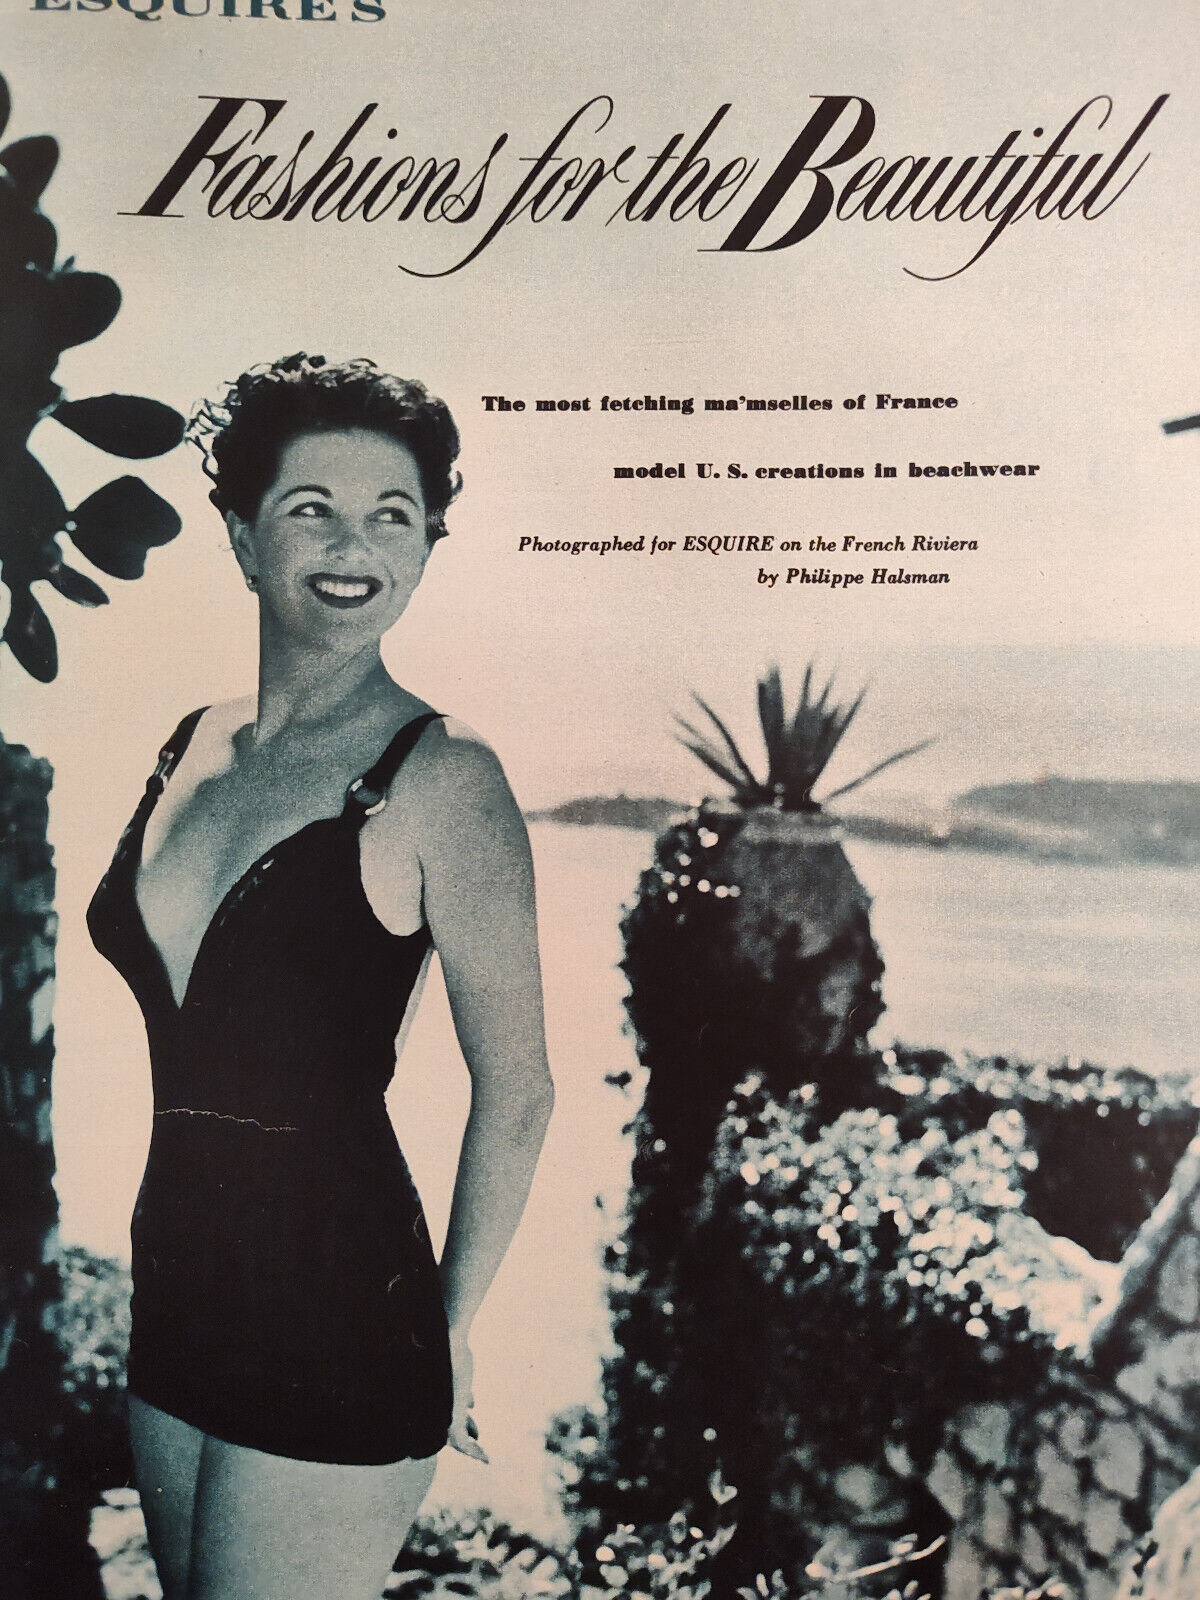 1951 Esquire  Article Artistic Photos Fashions for the Beautiful French Riviera